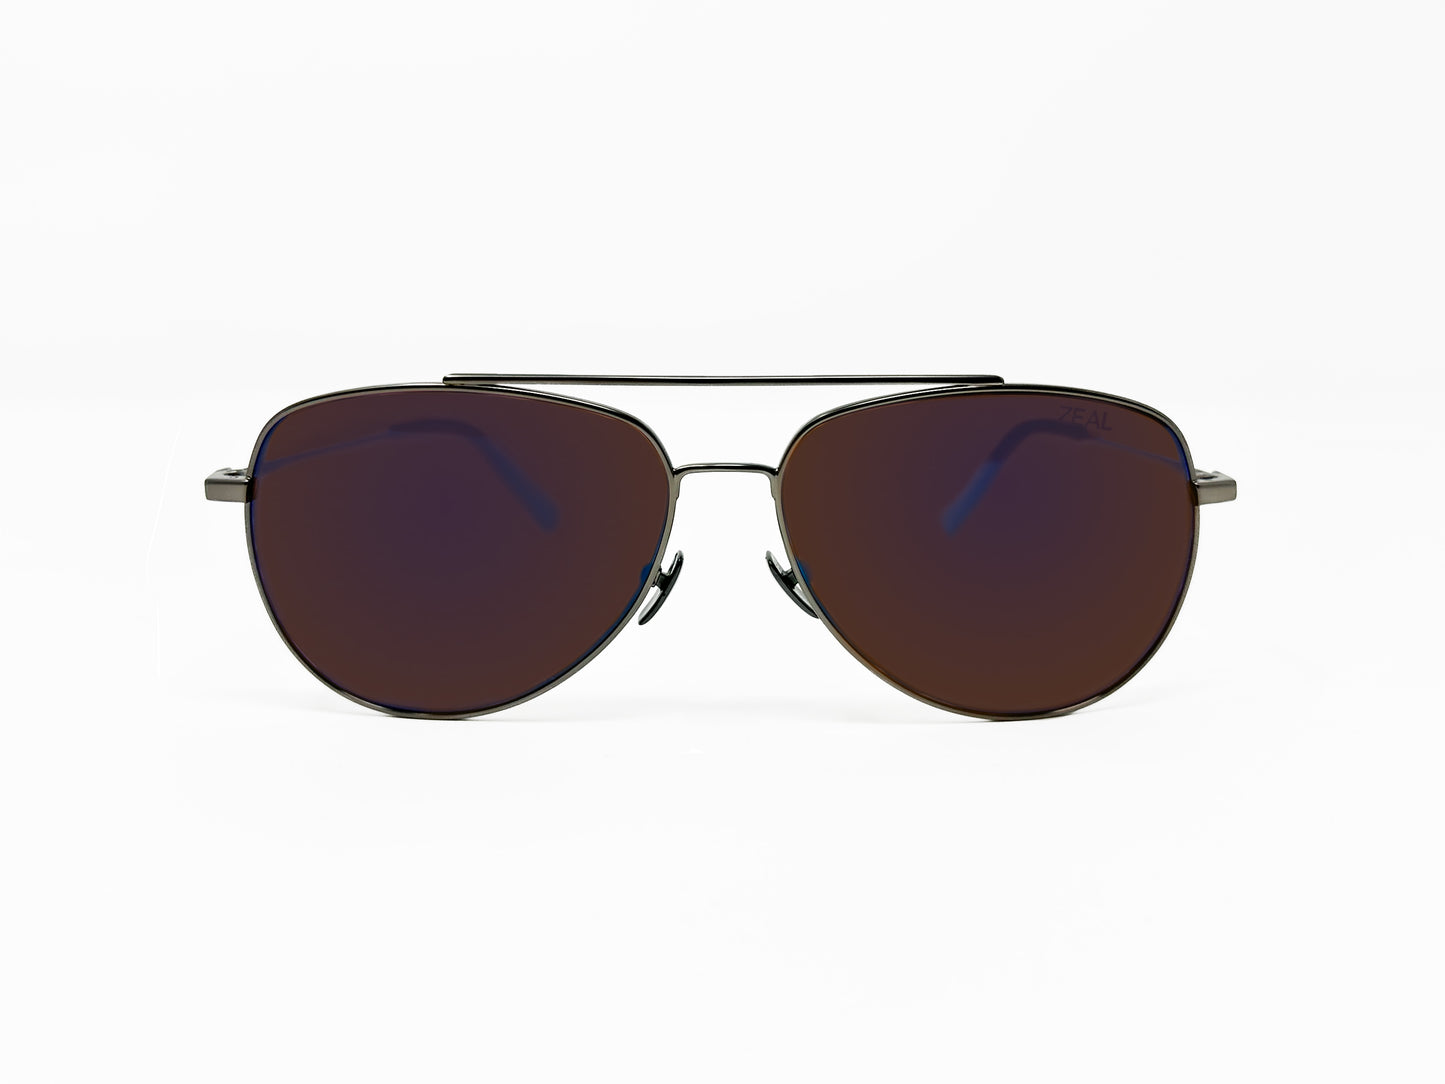 Zeal Optics rounded aviator style polarized sunglass. Model: Hawker. Color: 12720 - Gunmetal with brown lens with blue flash. Front view.